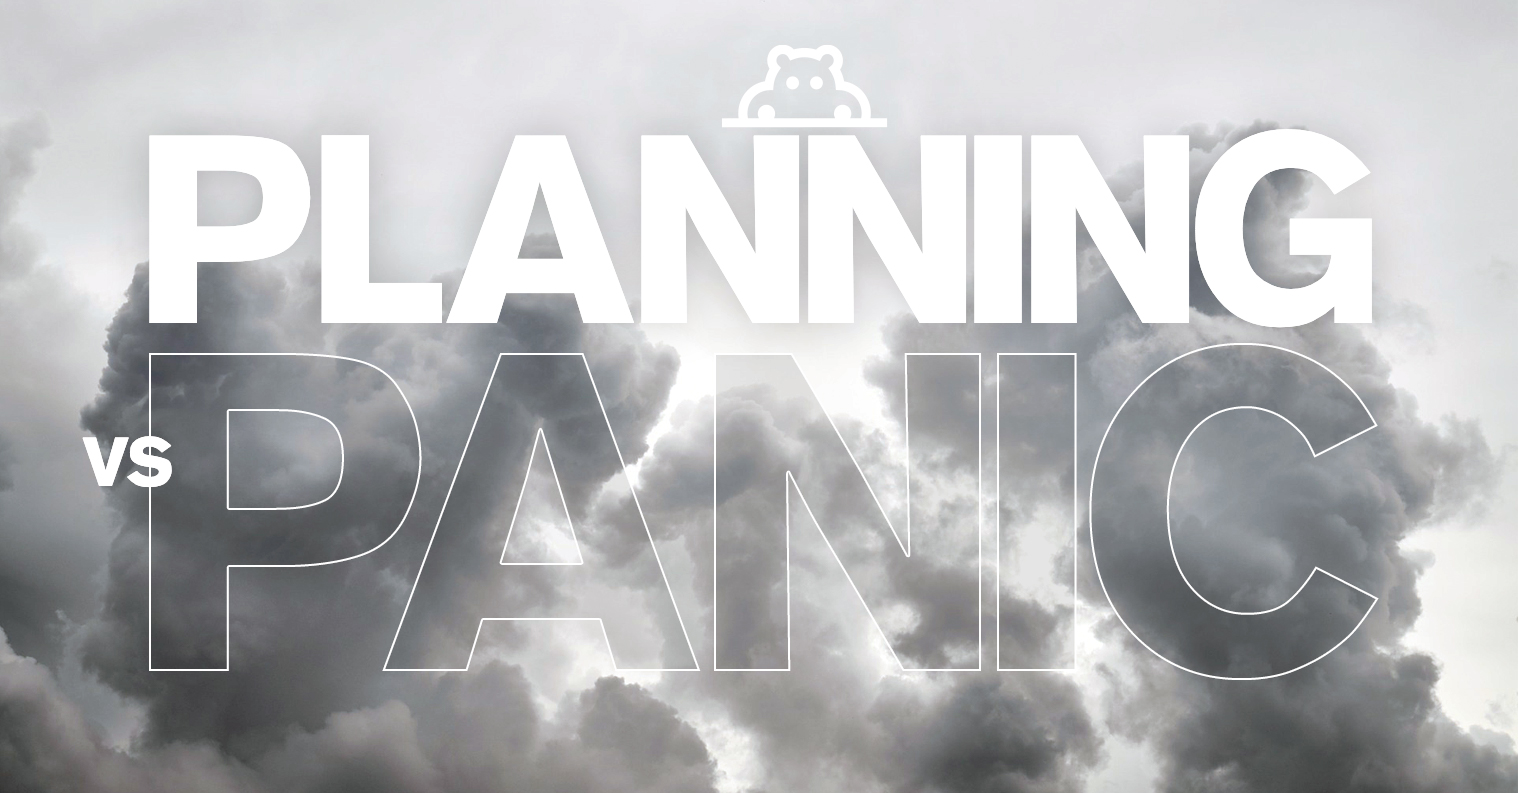 Don’t panic, plan for what could lie ahead.